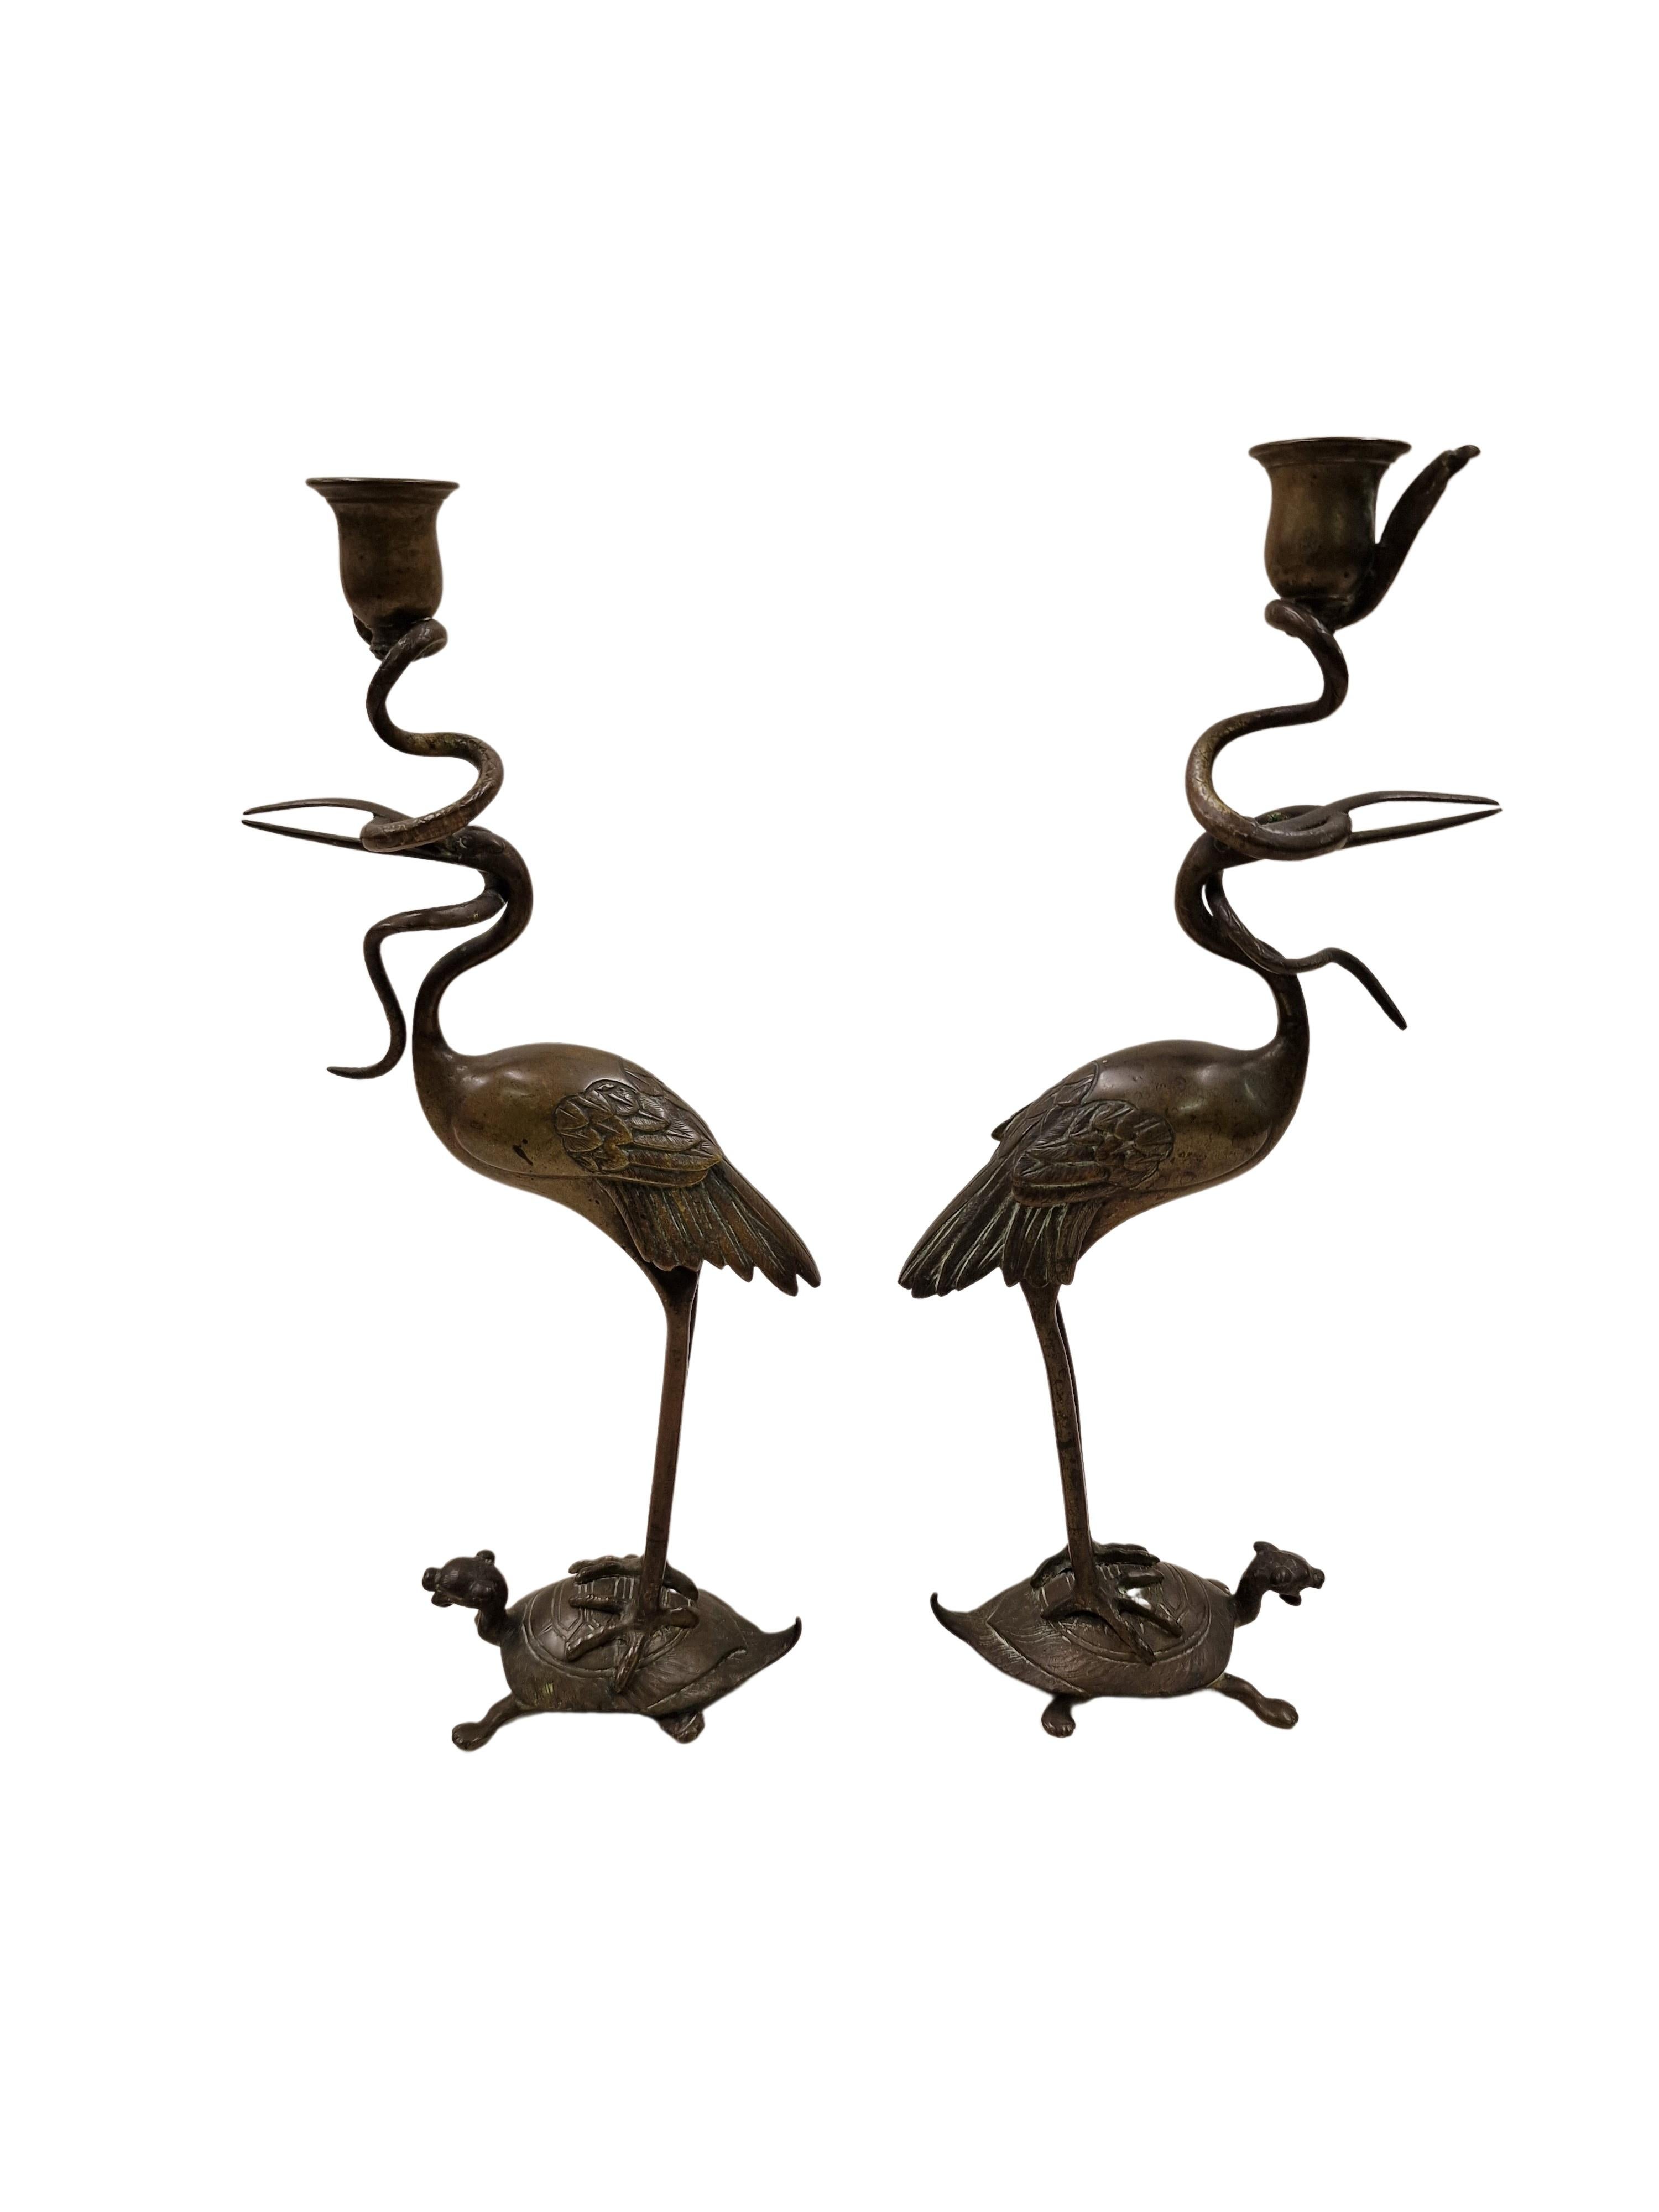 French Pair of Candle Sticks, Animal, Figural, Bronze, Napoleon III, ~ 1880, France